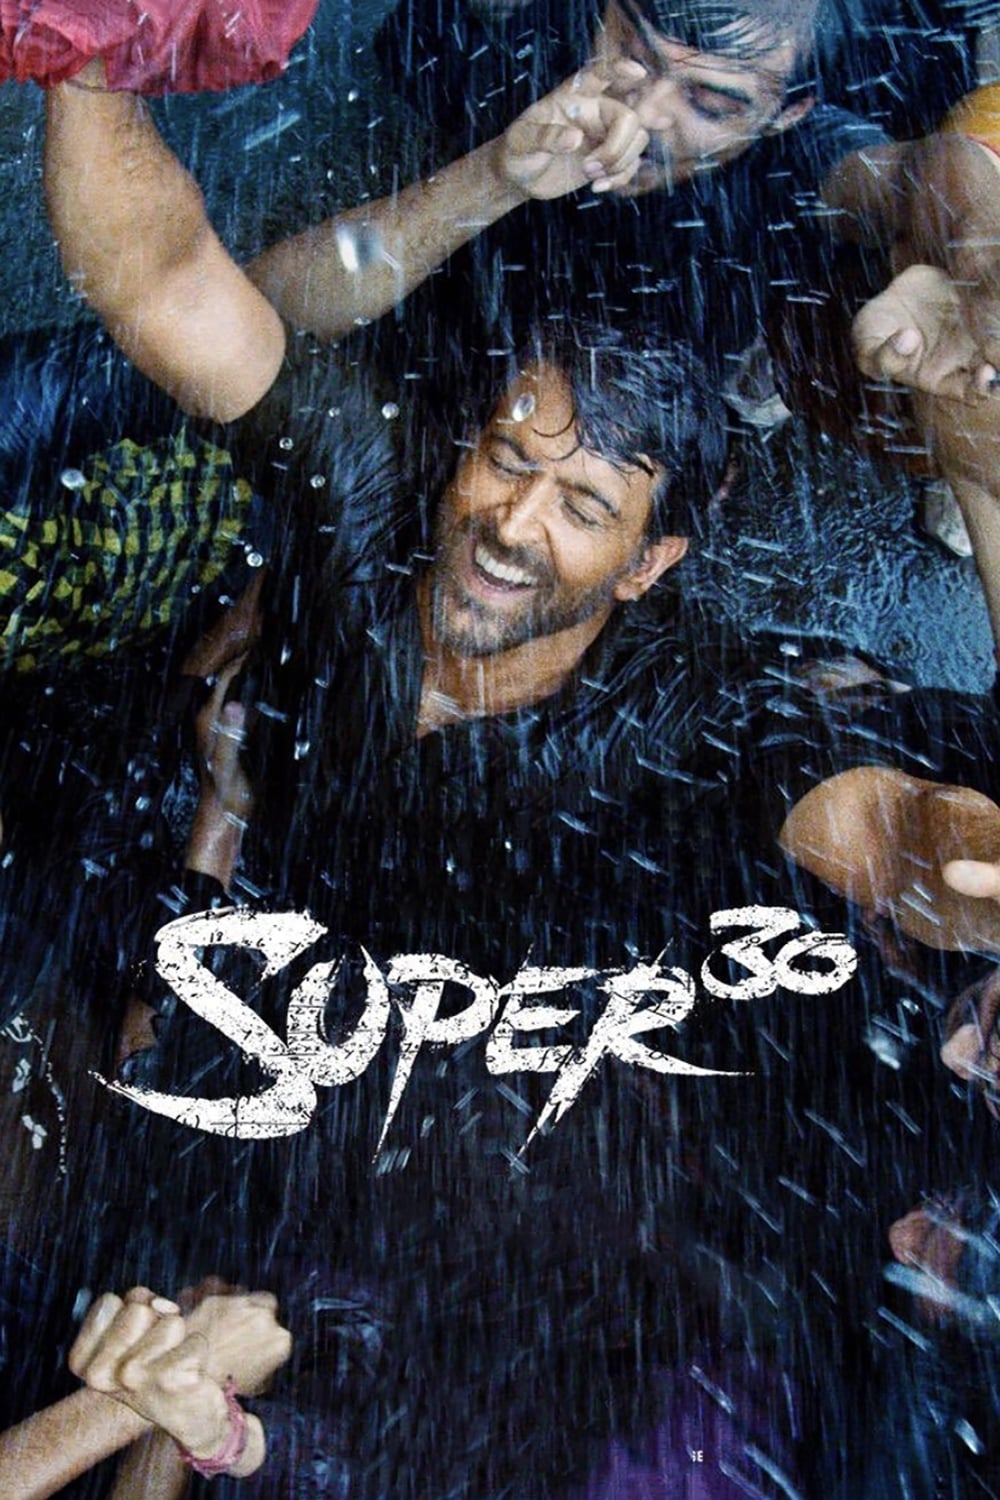 Super 30 streaming